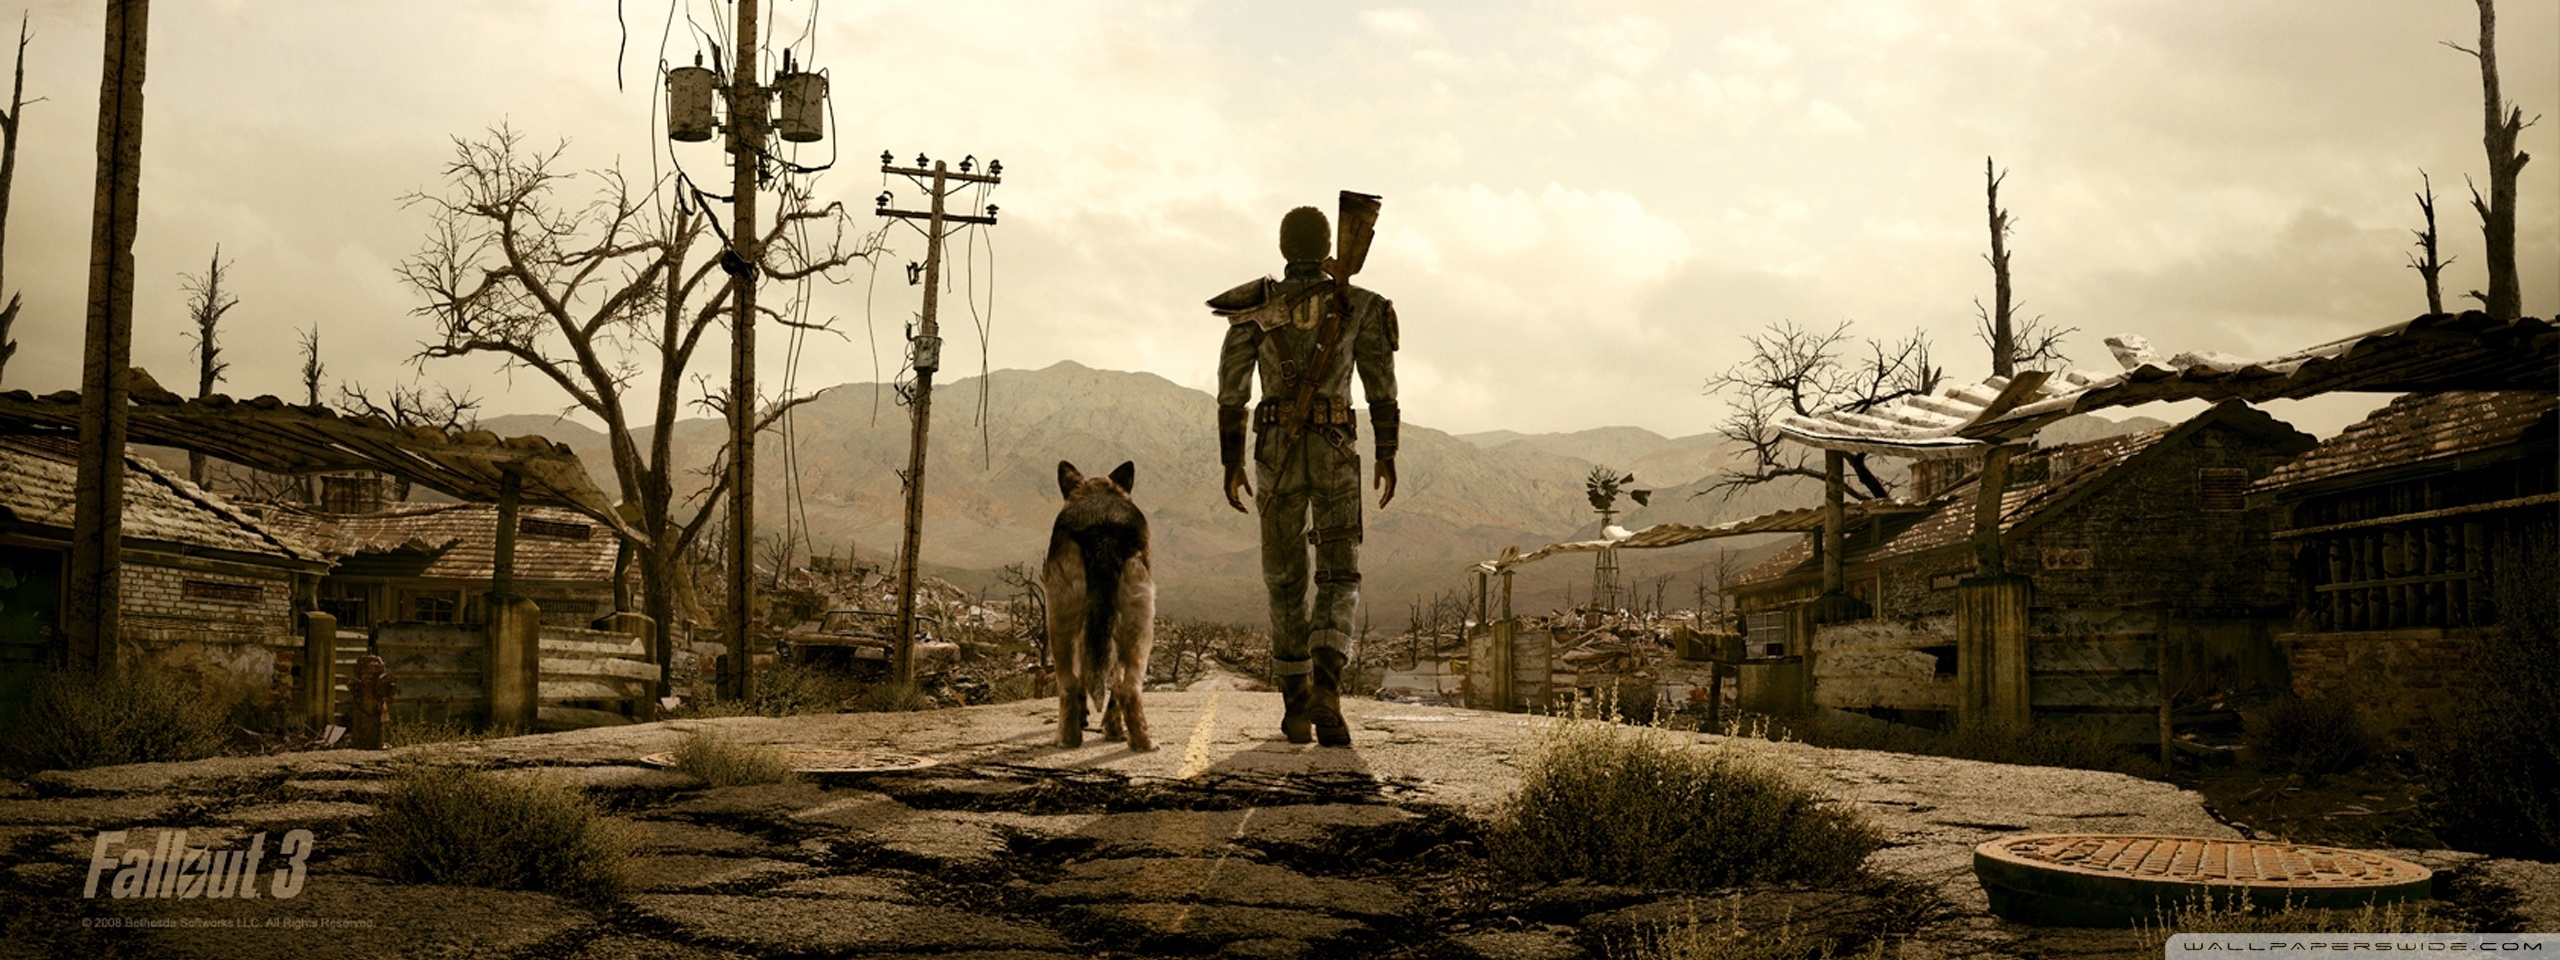 10 Best Dual Monitor Fallout Wallpaper FULL HD 1080p For PC Background